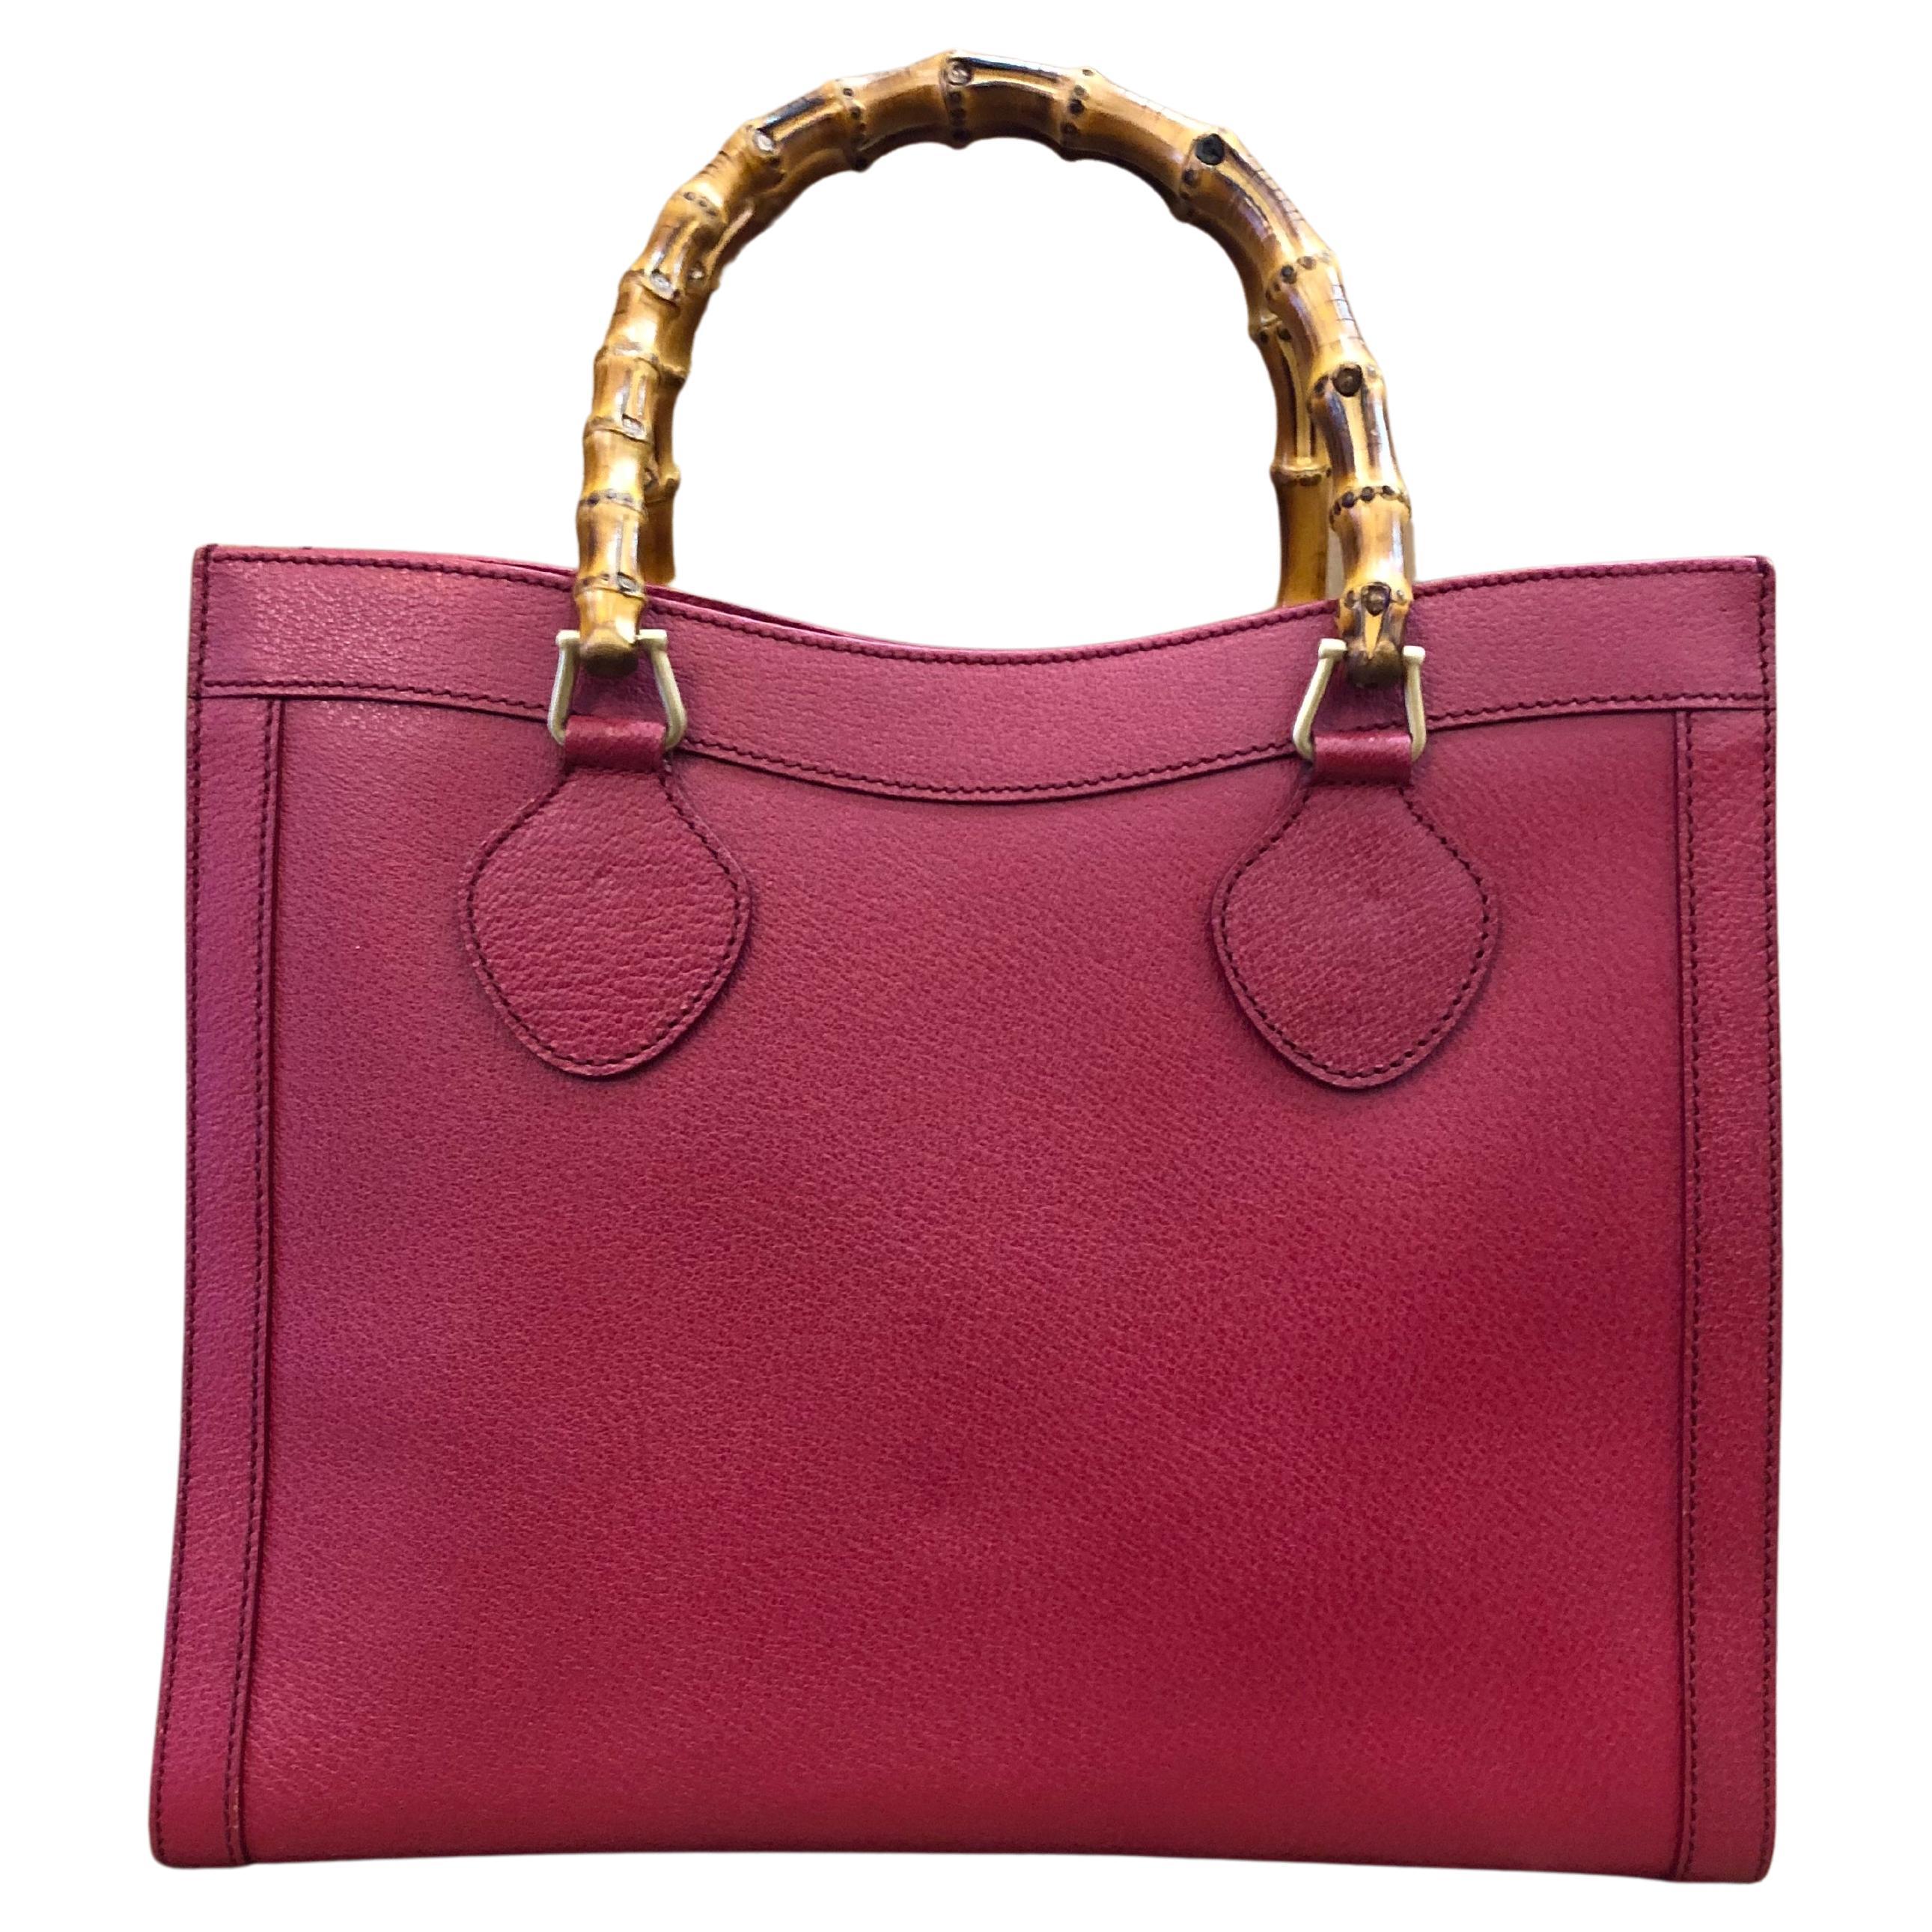 Vintage GUCCI Diana Tote Bamboo Tote Bag Leather Dark Pink/Red (Medium)